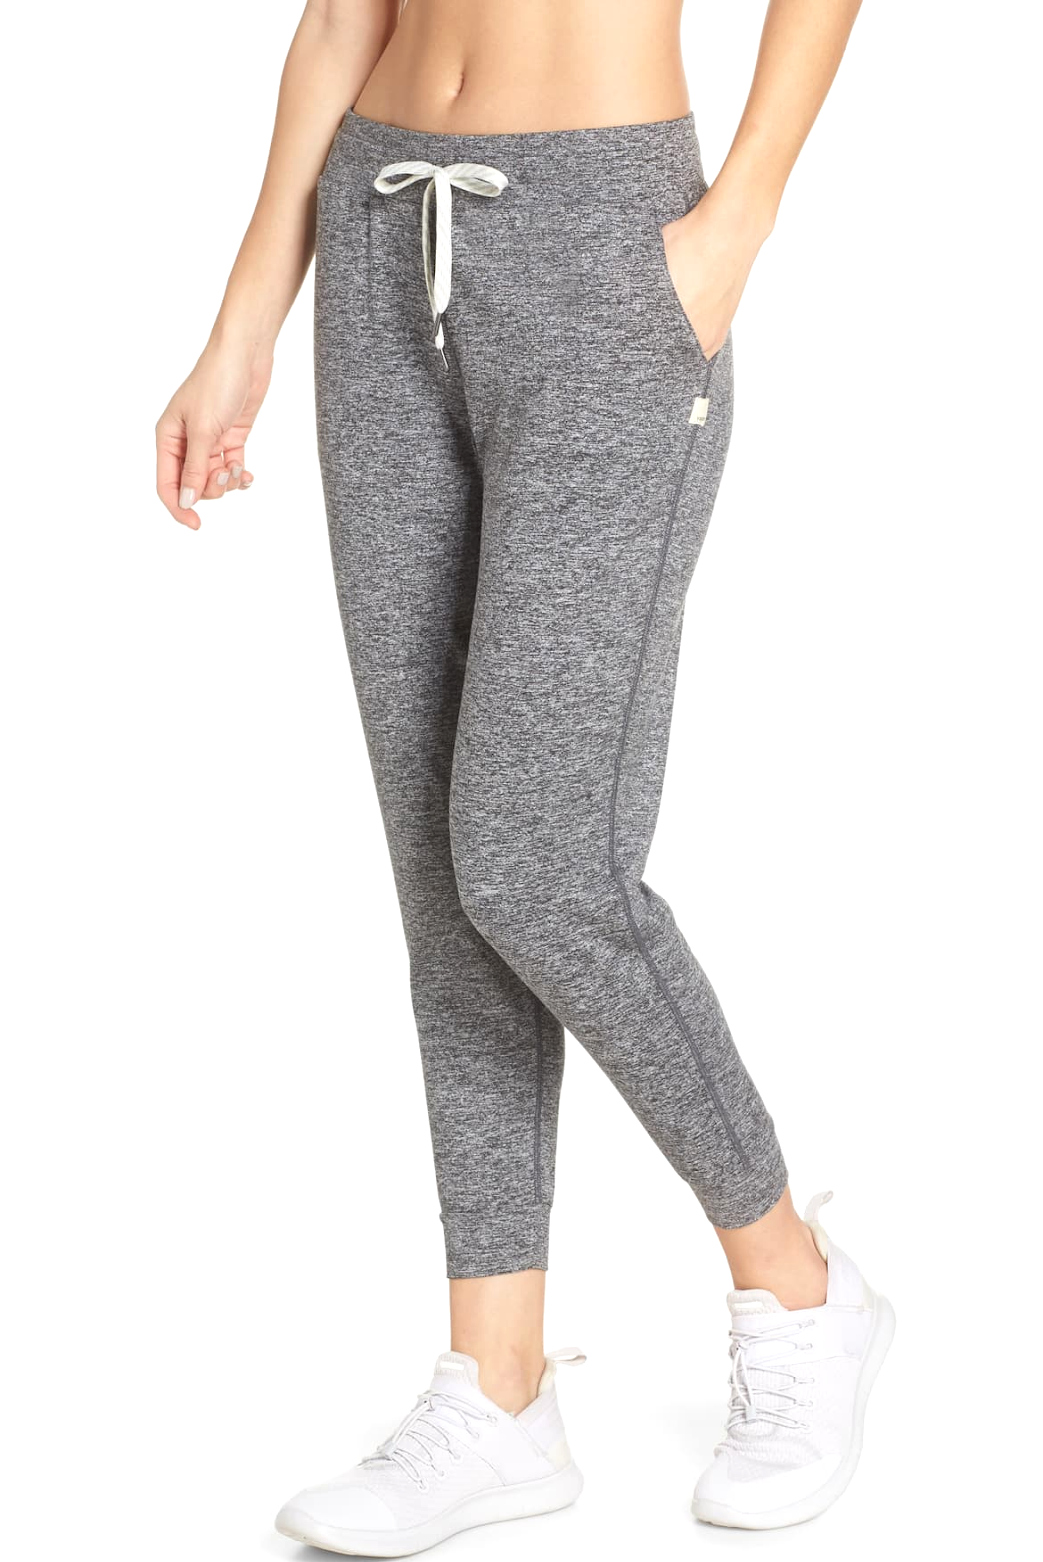 Joggers for Women: Hop on This Travel Fashion Trend